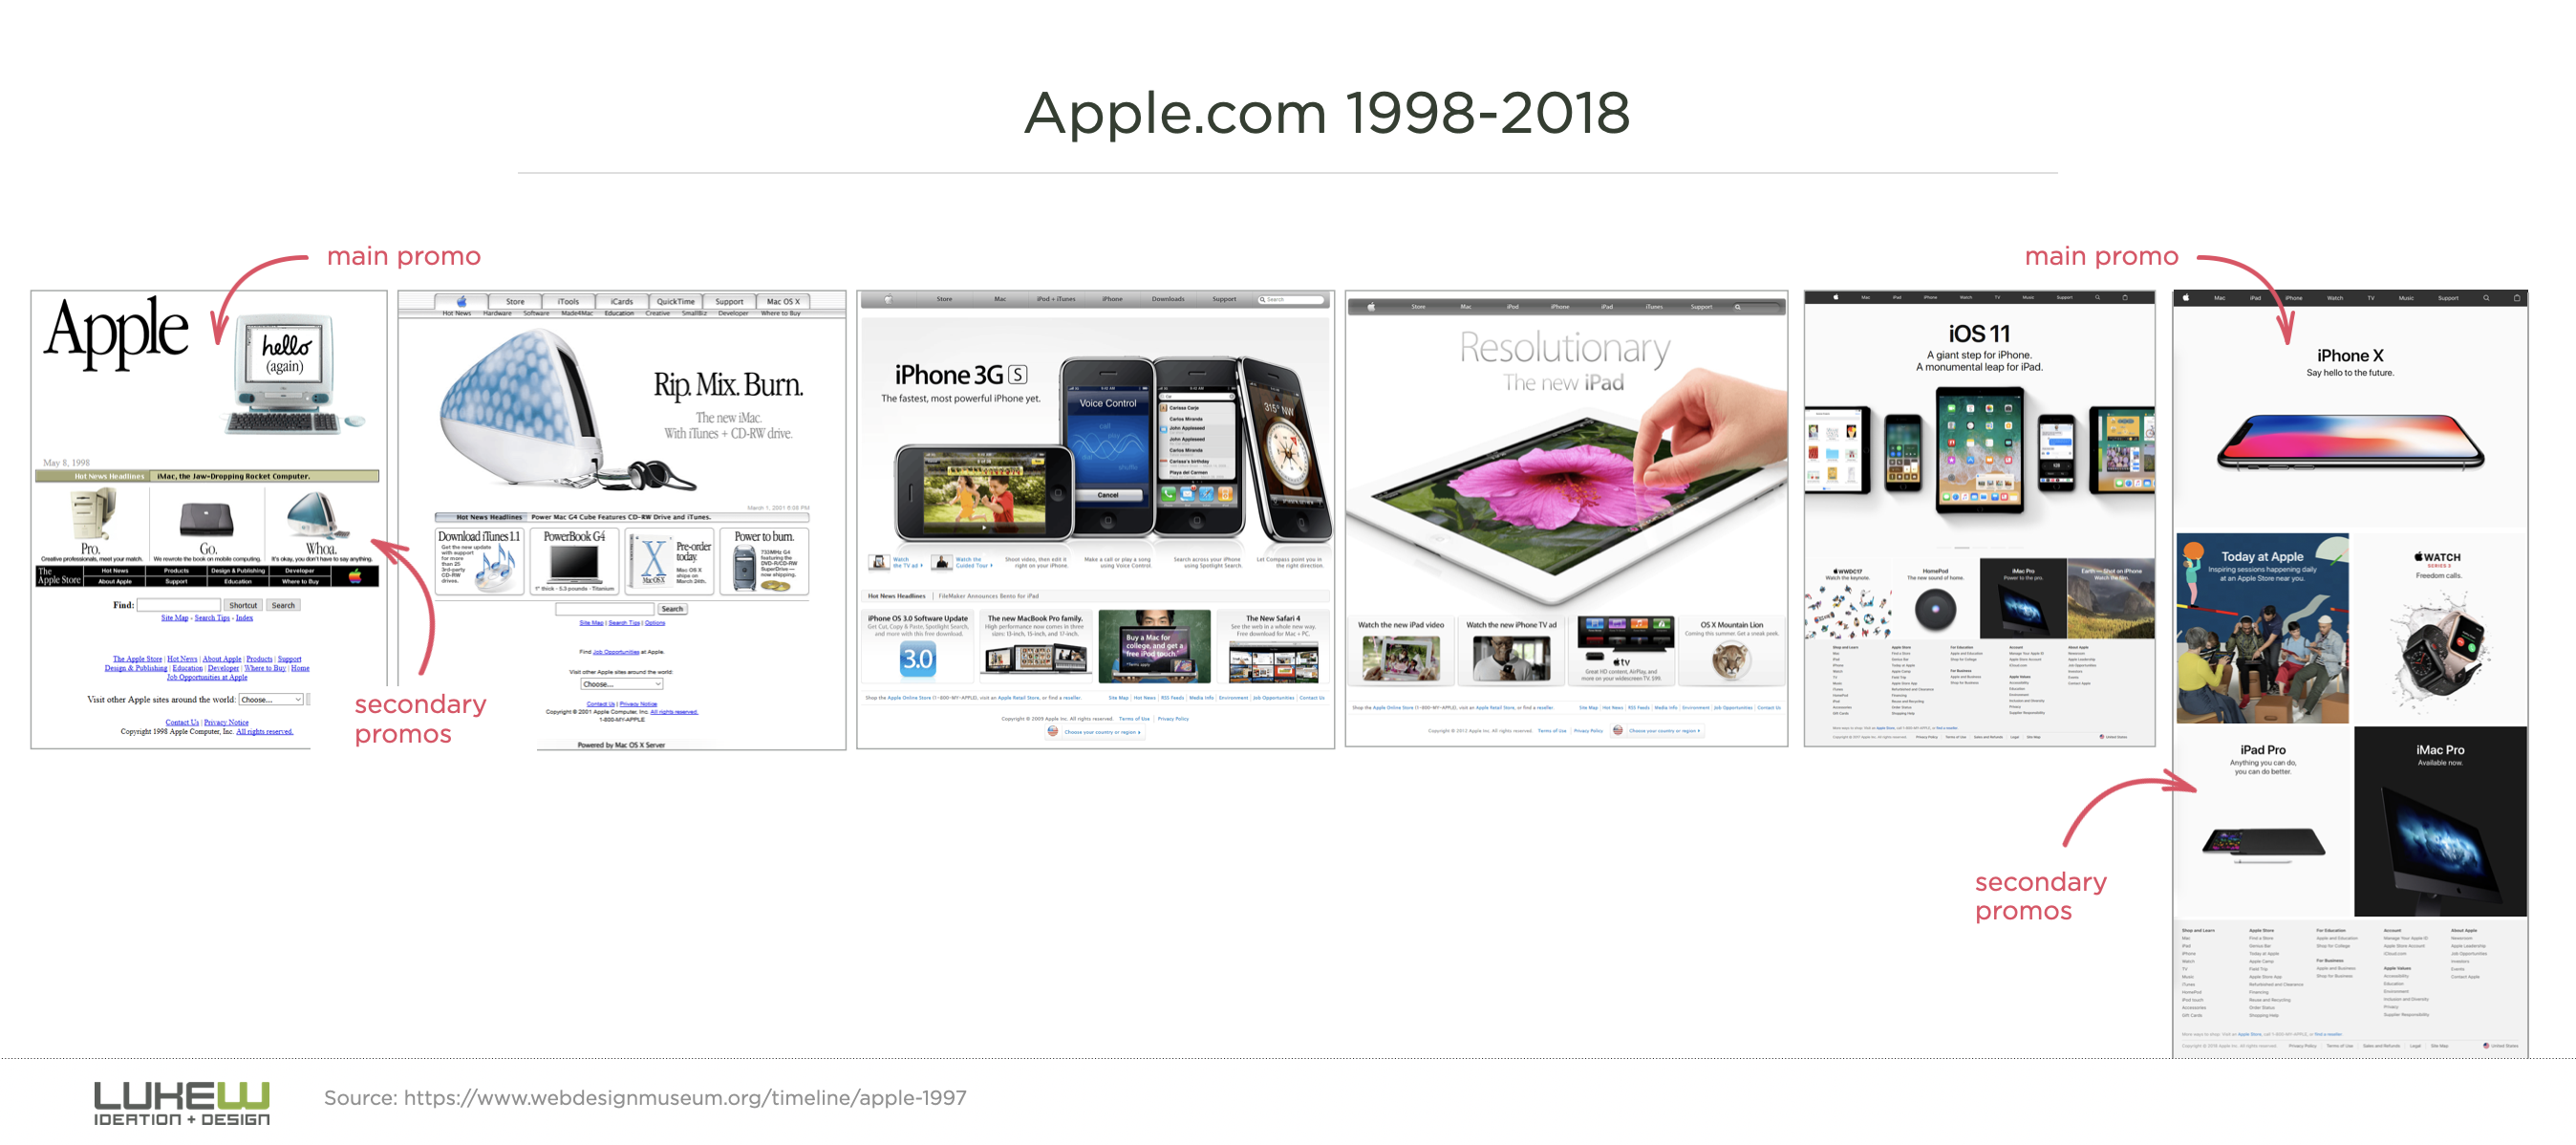 Design is never done: the Apple Website edition